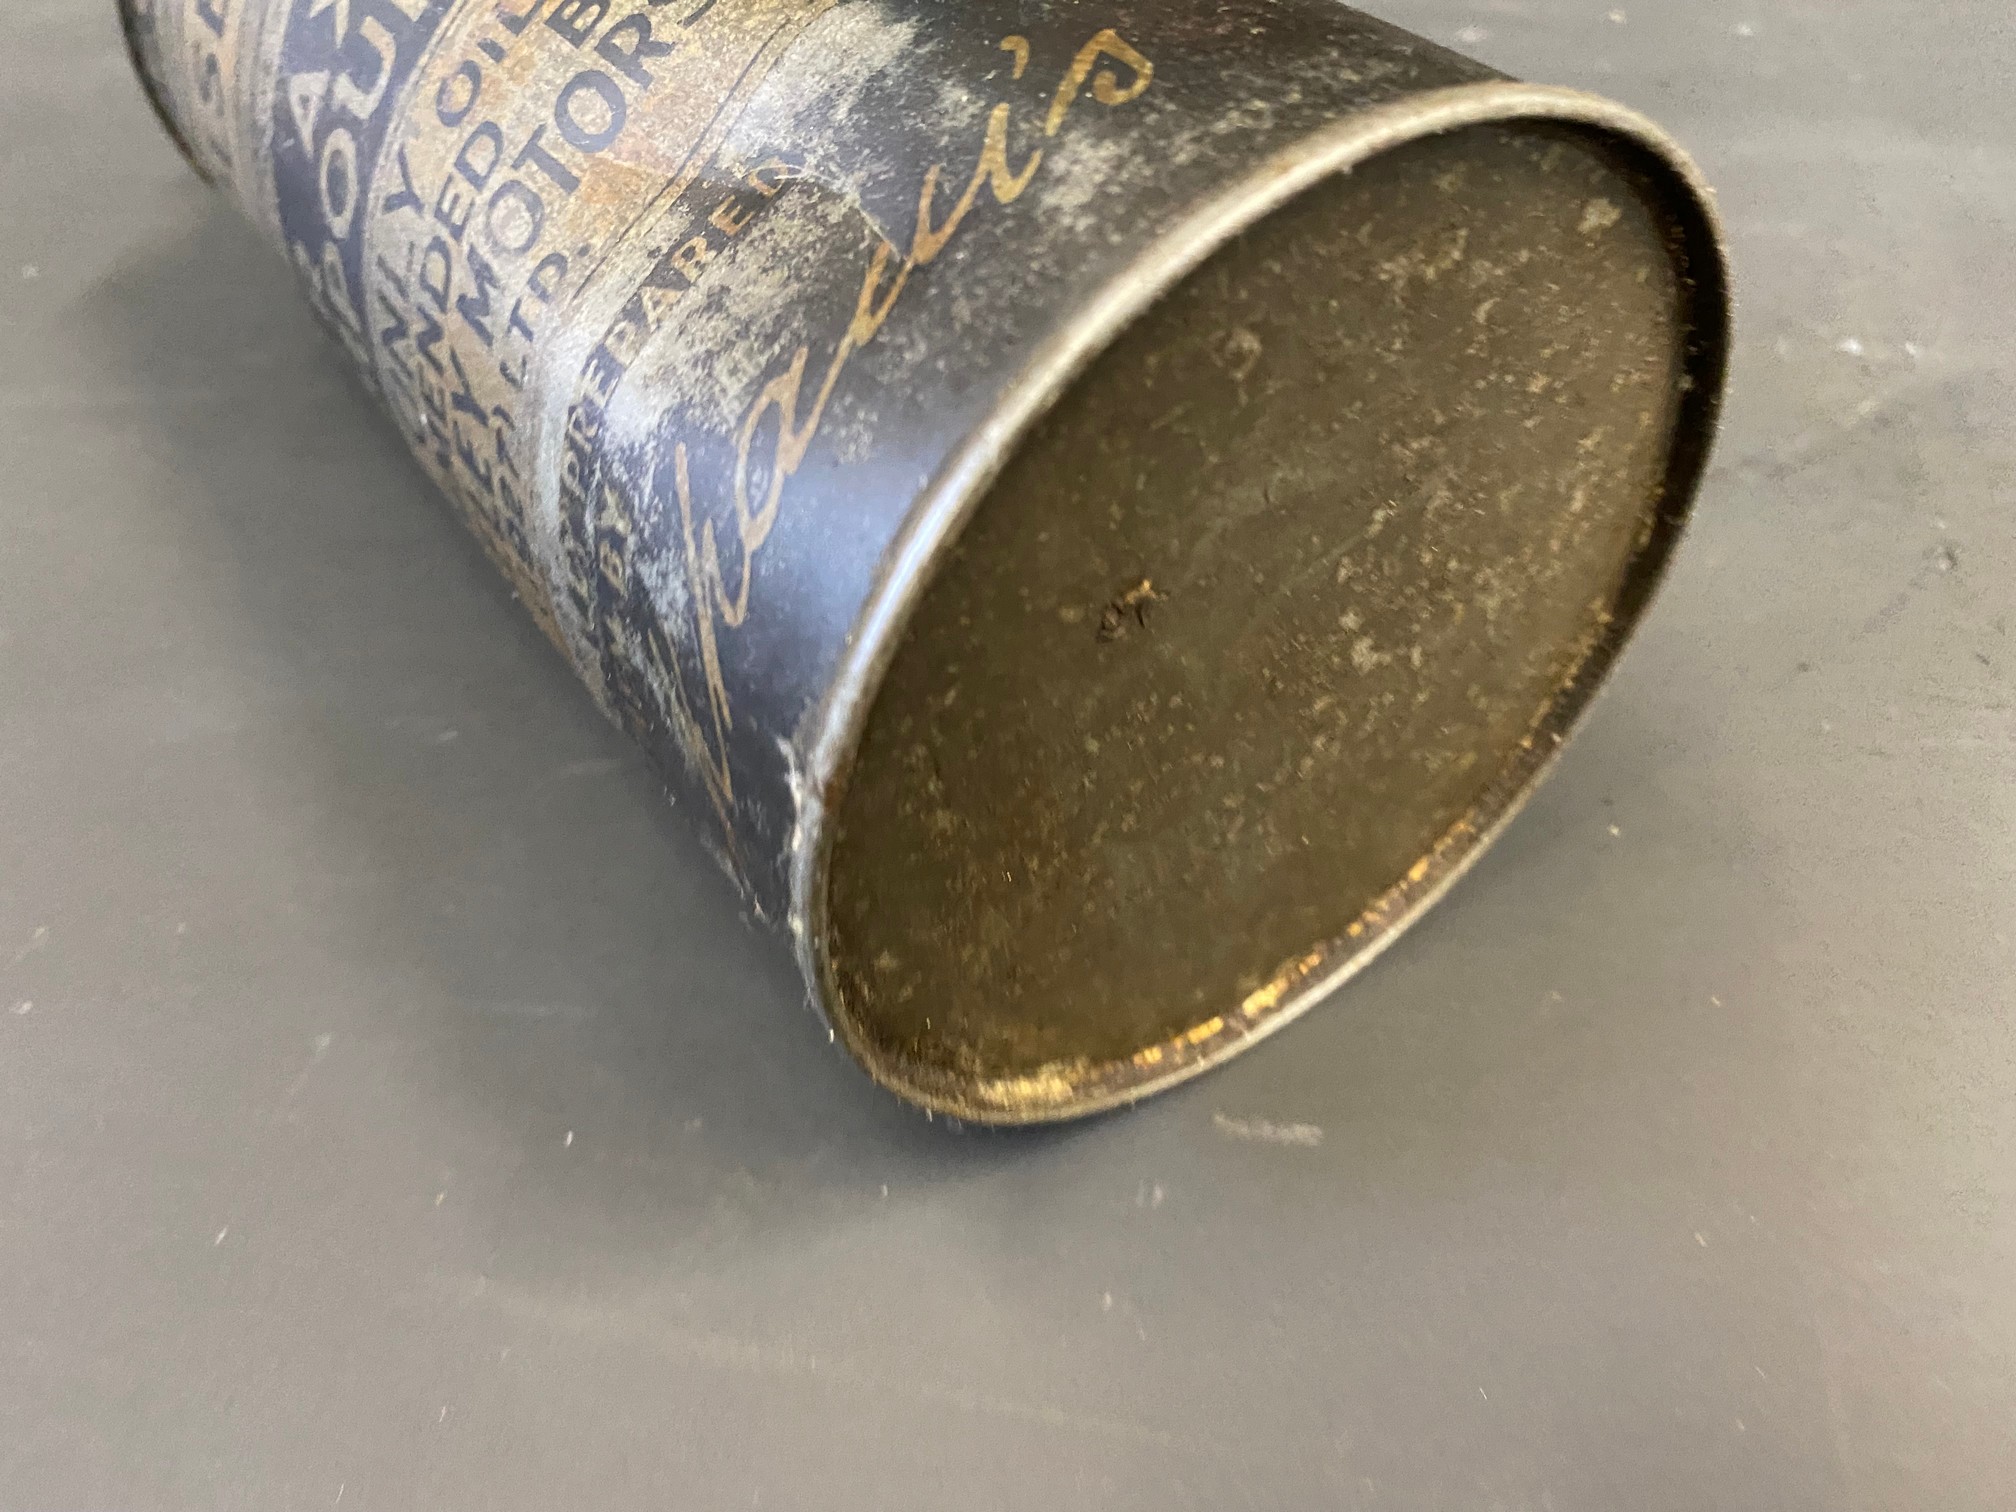 A rare Duckham's Wolseley Rear Axle Compound cylindrical quart can. - Image 9 of 9